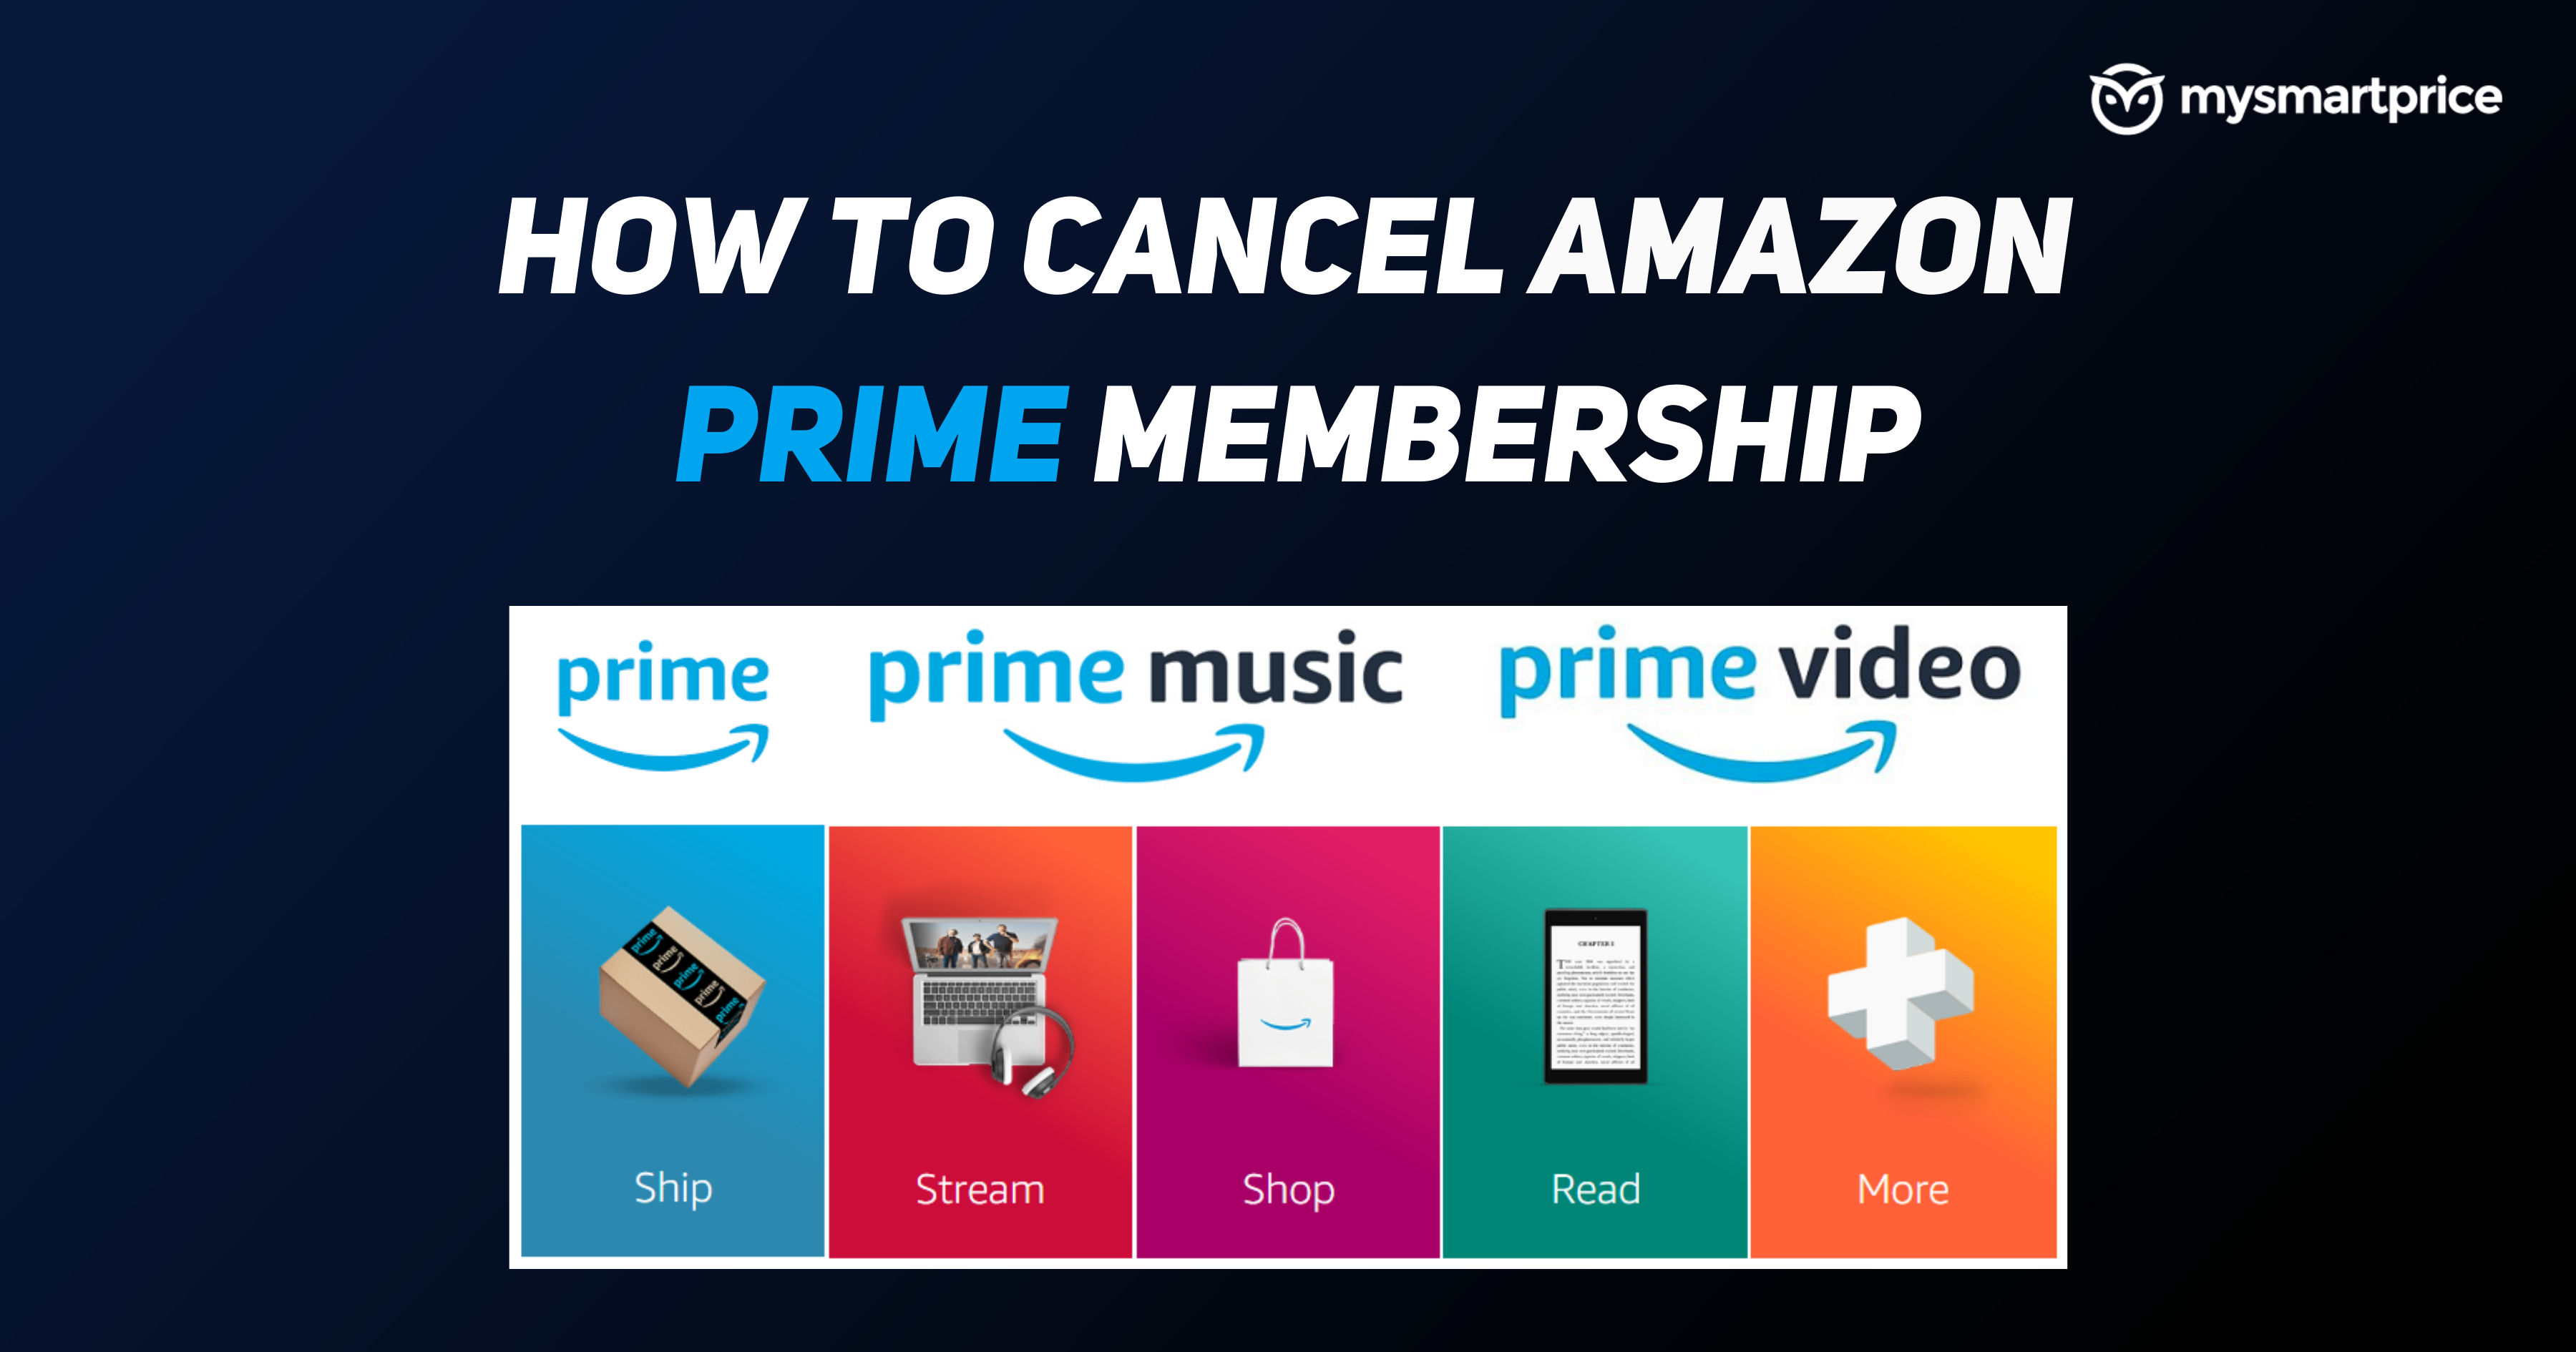 https://assets.mspimages.in/gear/wp-content/uploads/2021/07/How-to-Cancel-Amazon-Prime-Membership.png